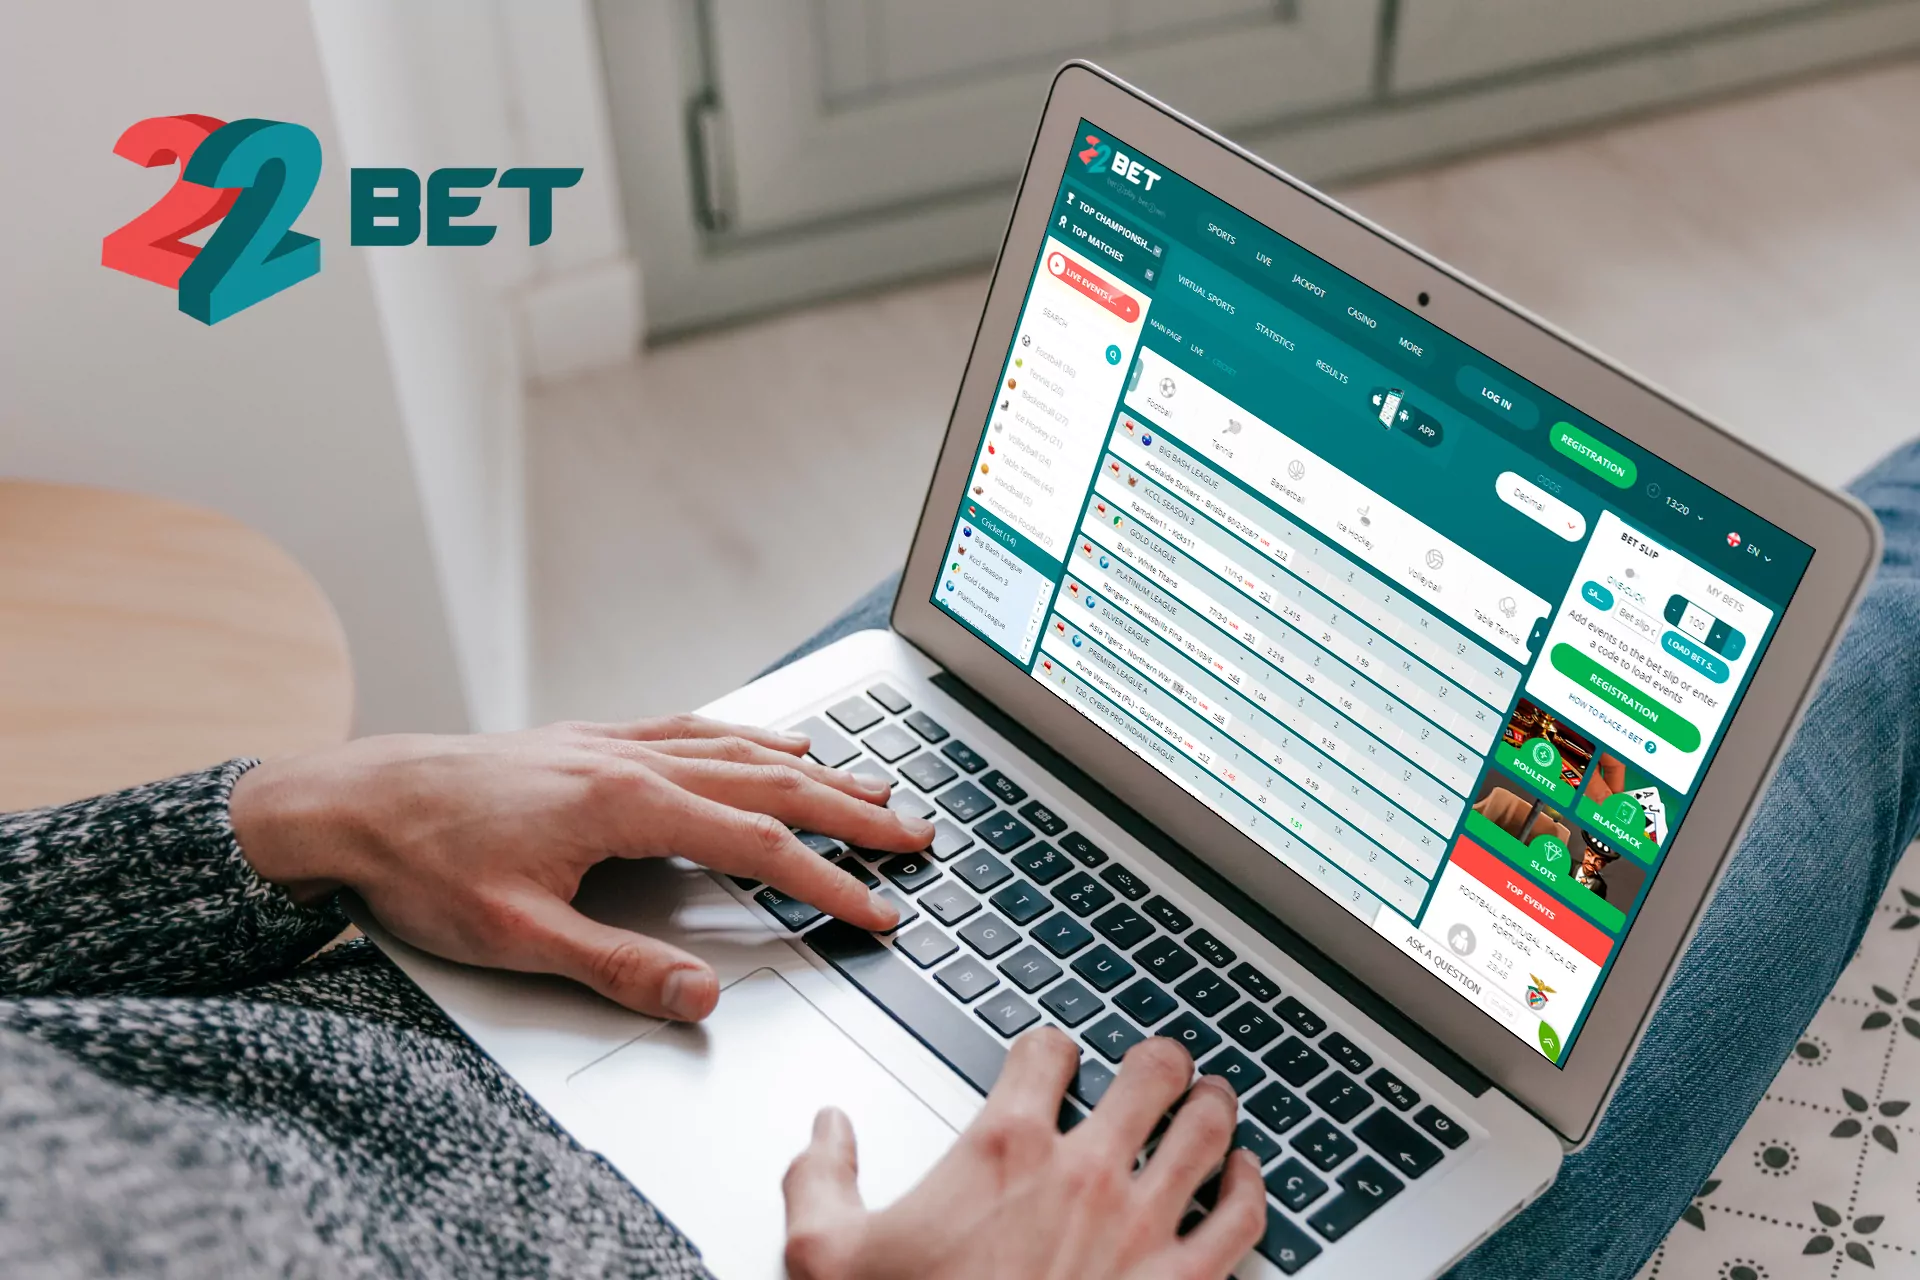 22bet has a special bonus for cricket betting fans that doubles a deposit.